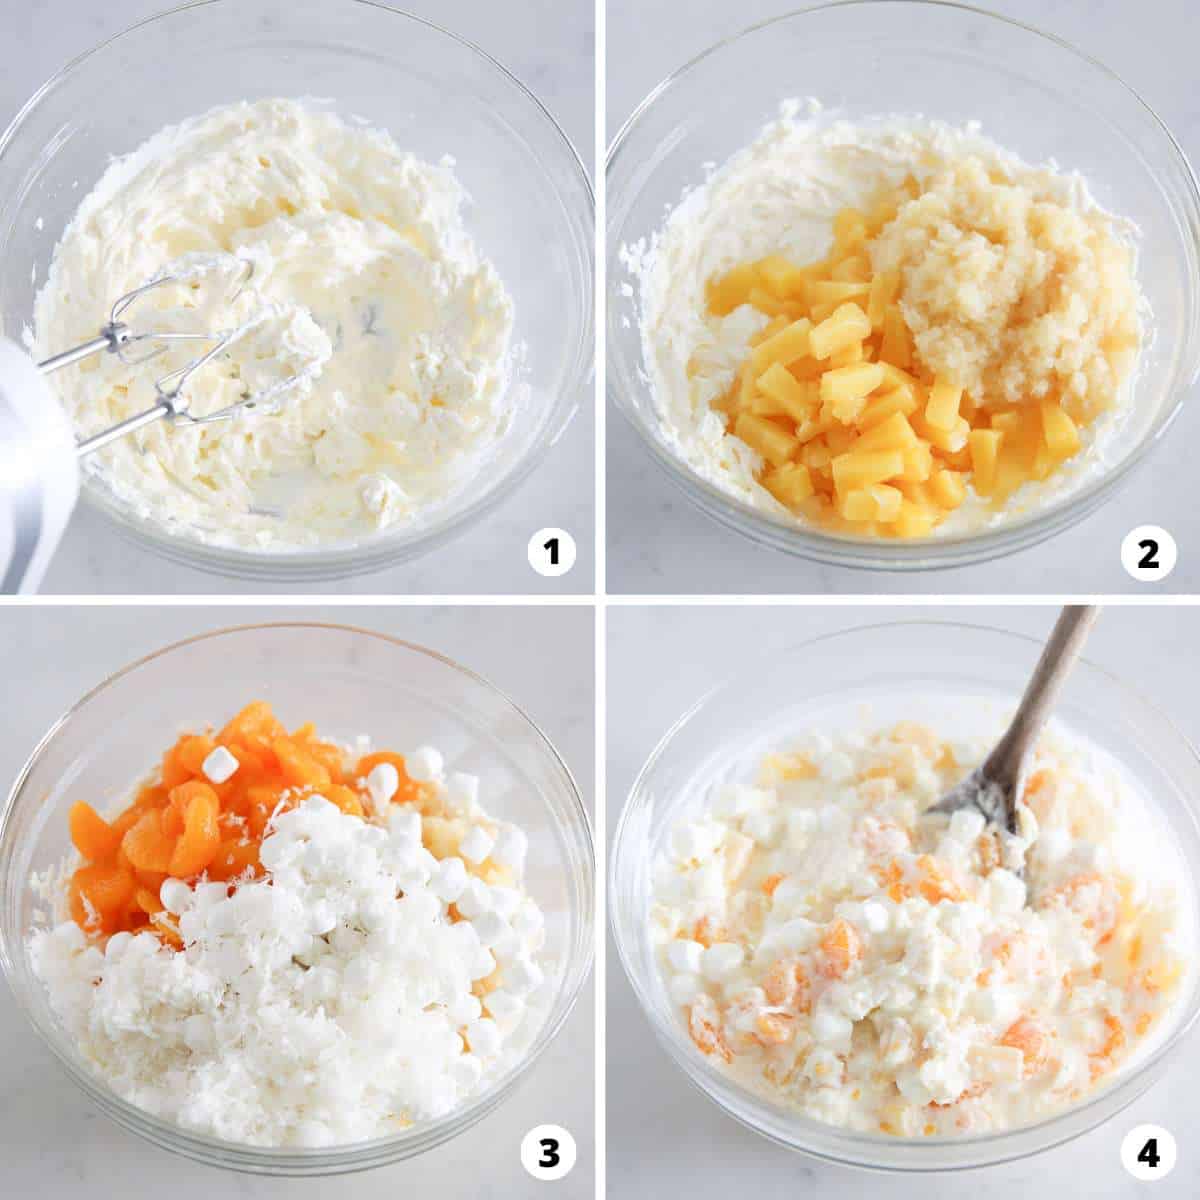 Showing how to make ambrosia salad in a 4 step collage.